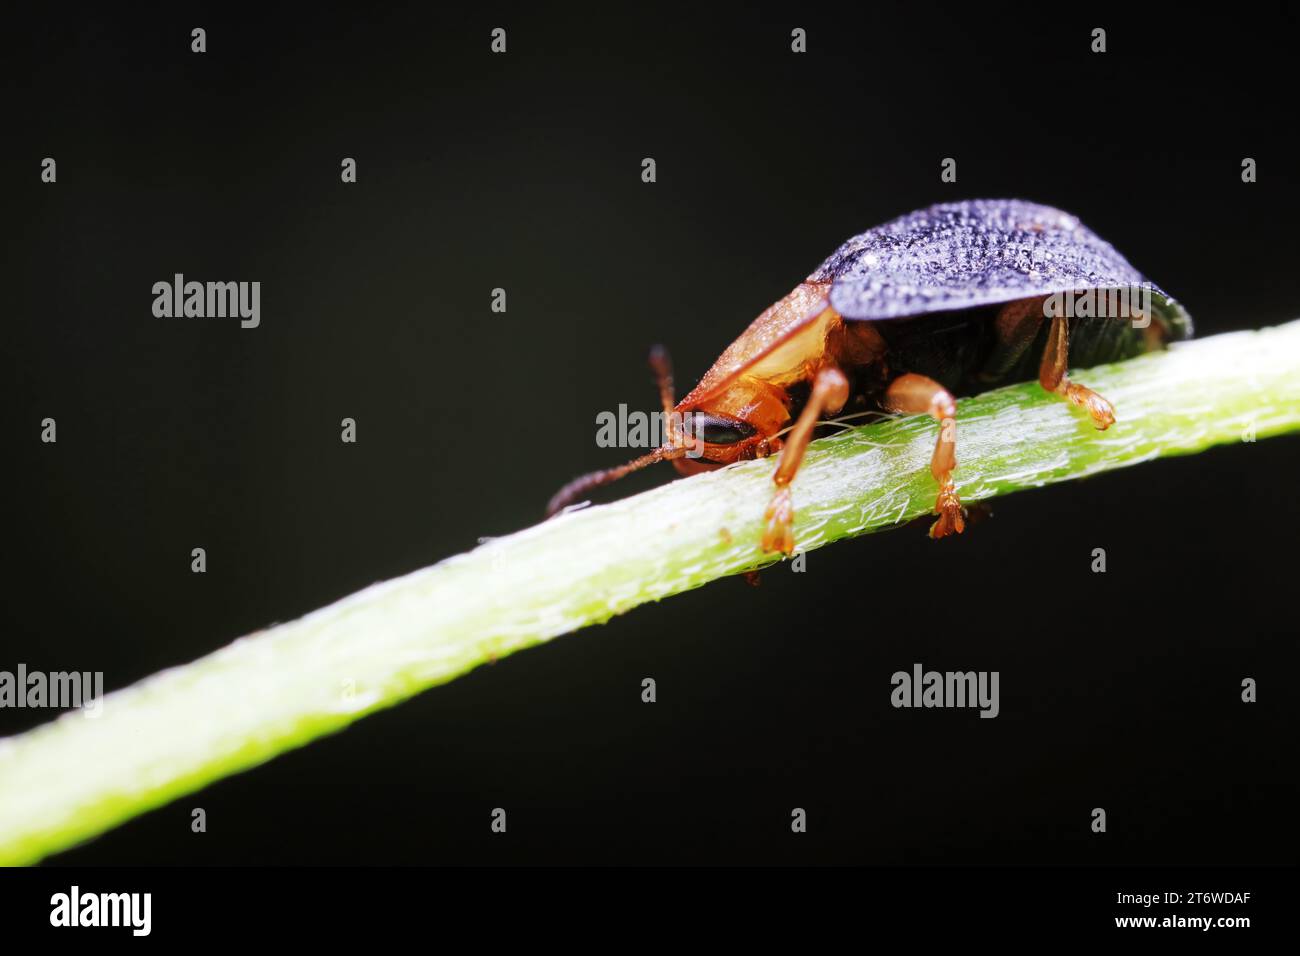 Carabidae insect live on green leaves Stock Photo